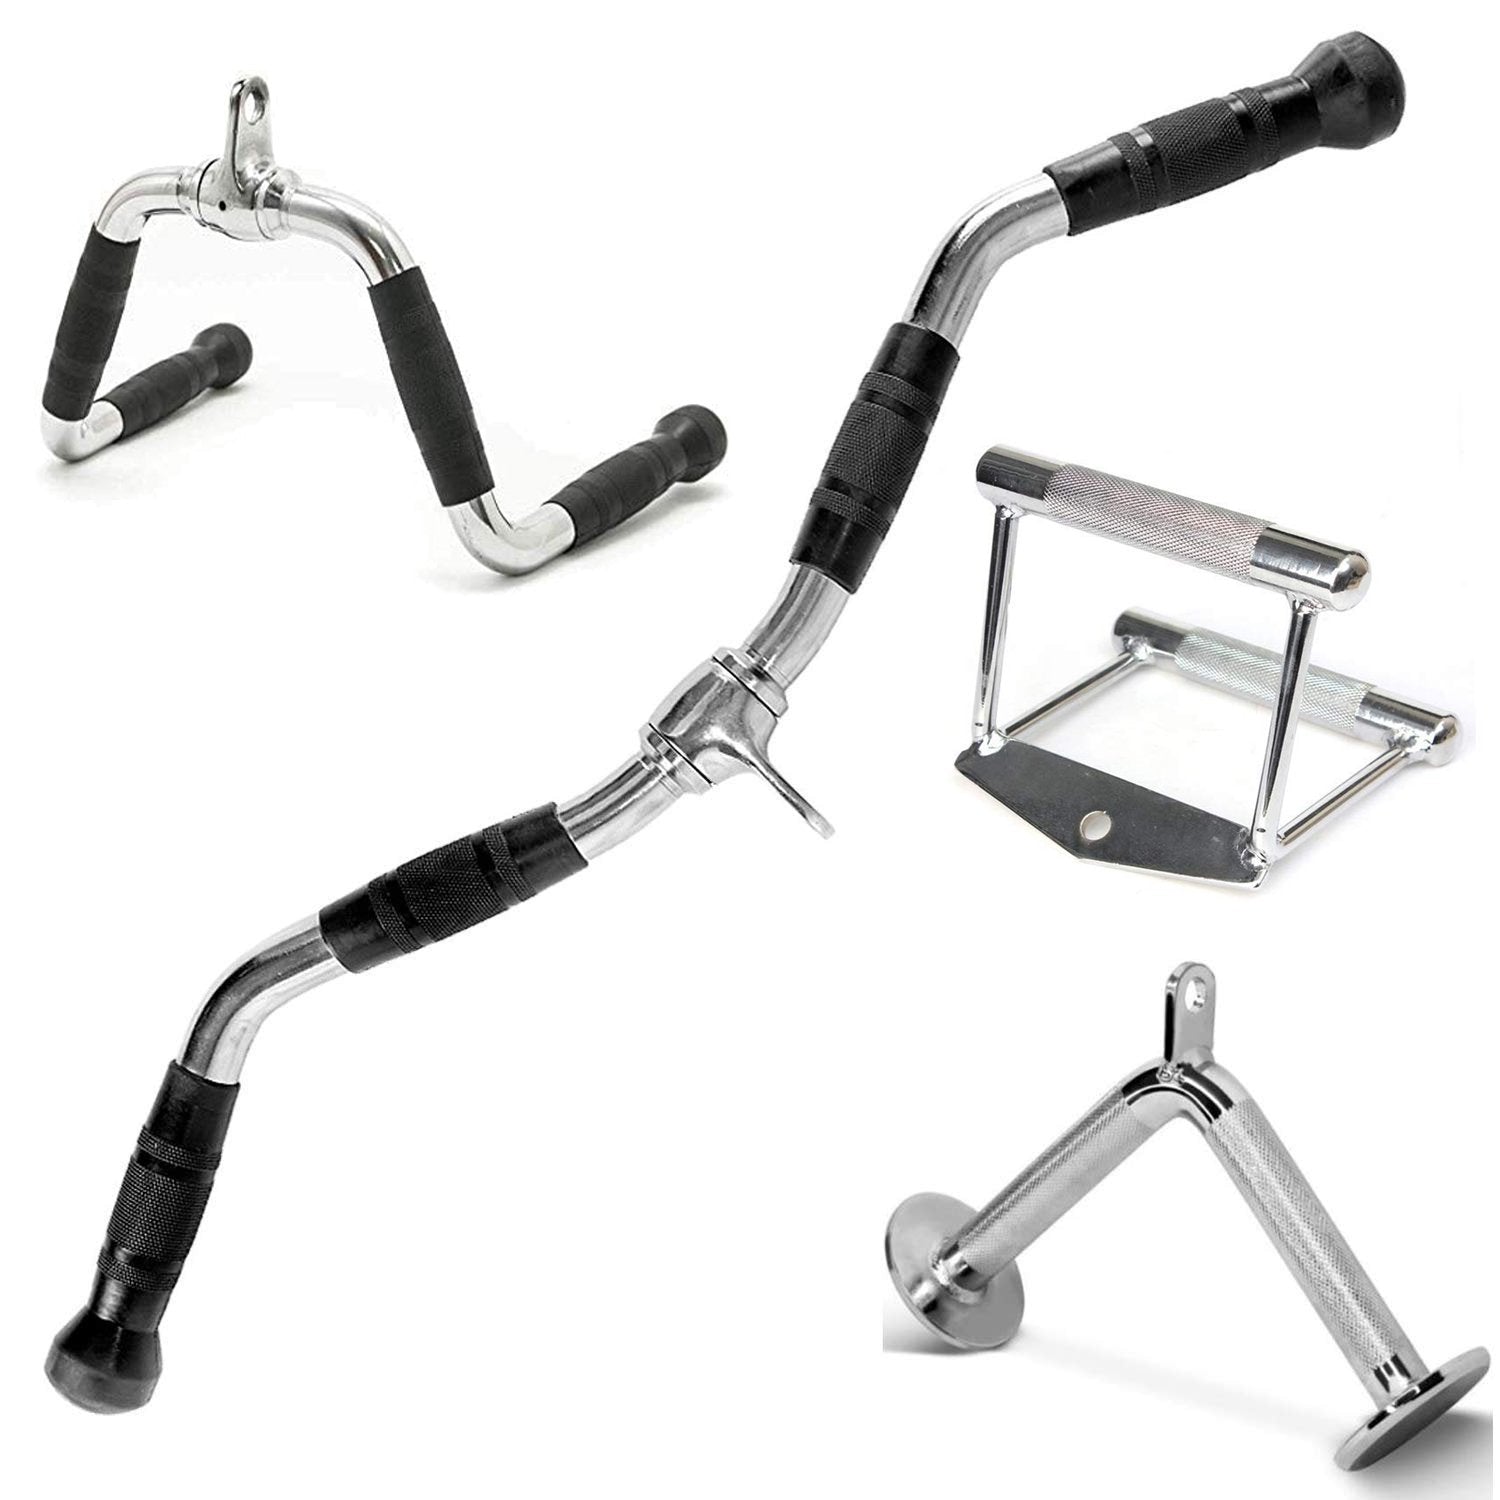 V Shaped Bar Attachment Cable Handle LAT Pull Bar Biceps Triceps Workout  For Gym